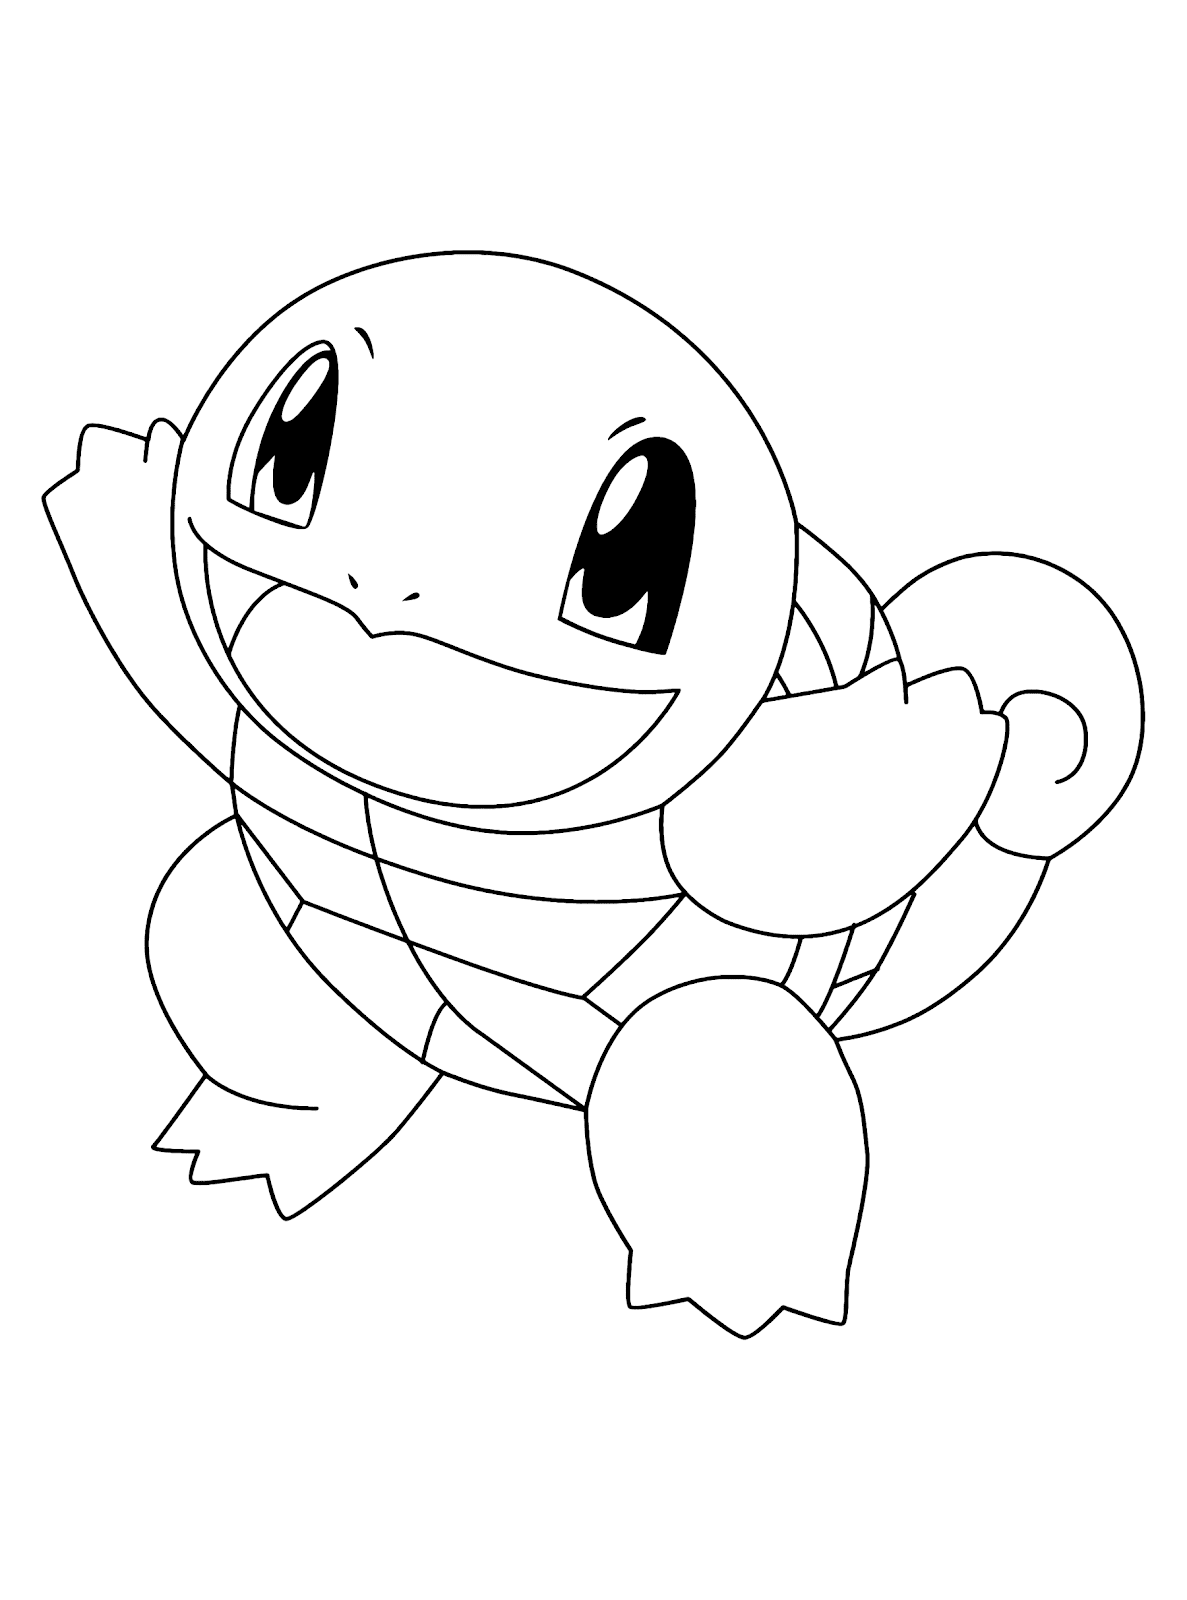 Pokemon Squirtle Coloring 4